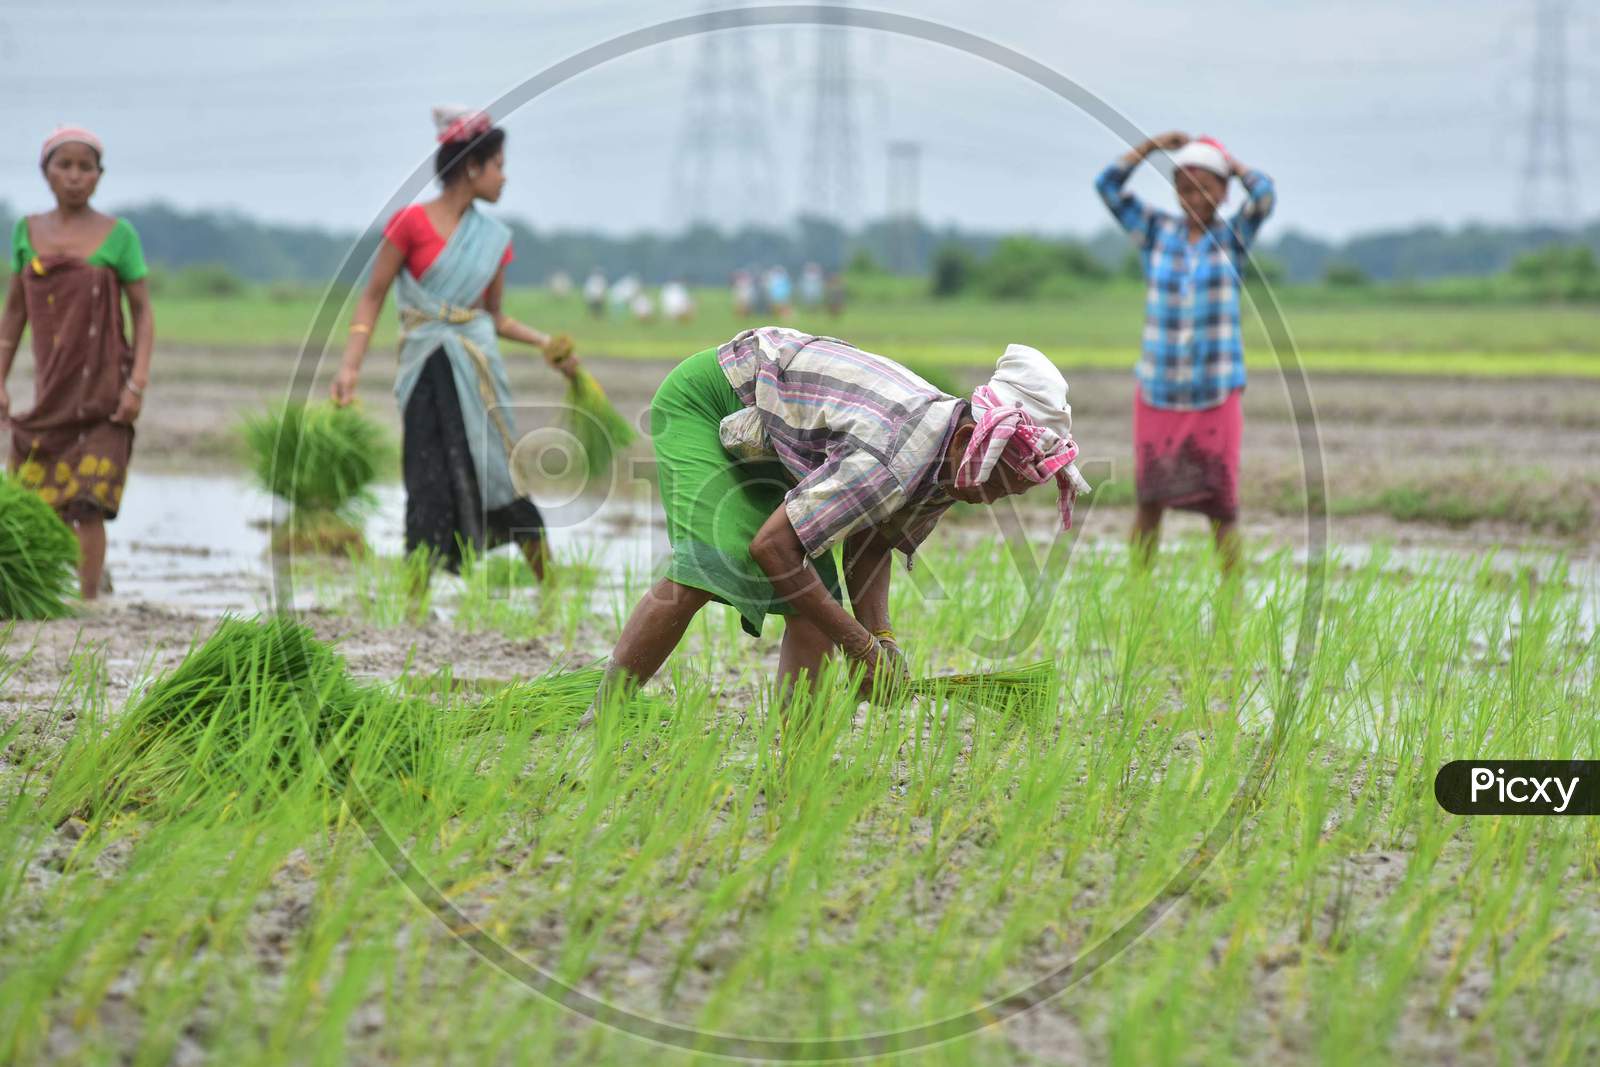 Tribal Farmers Plant Paddy Saplings  At A Field  In Nagaon District In The Northeastern State Of Assam, India